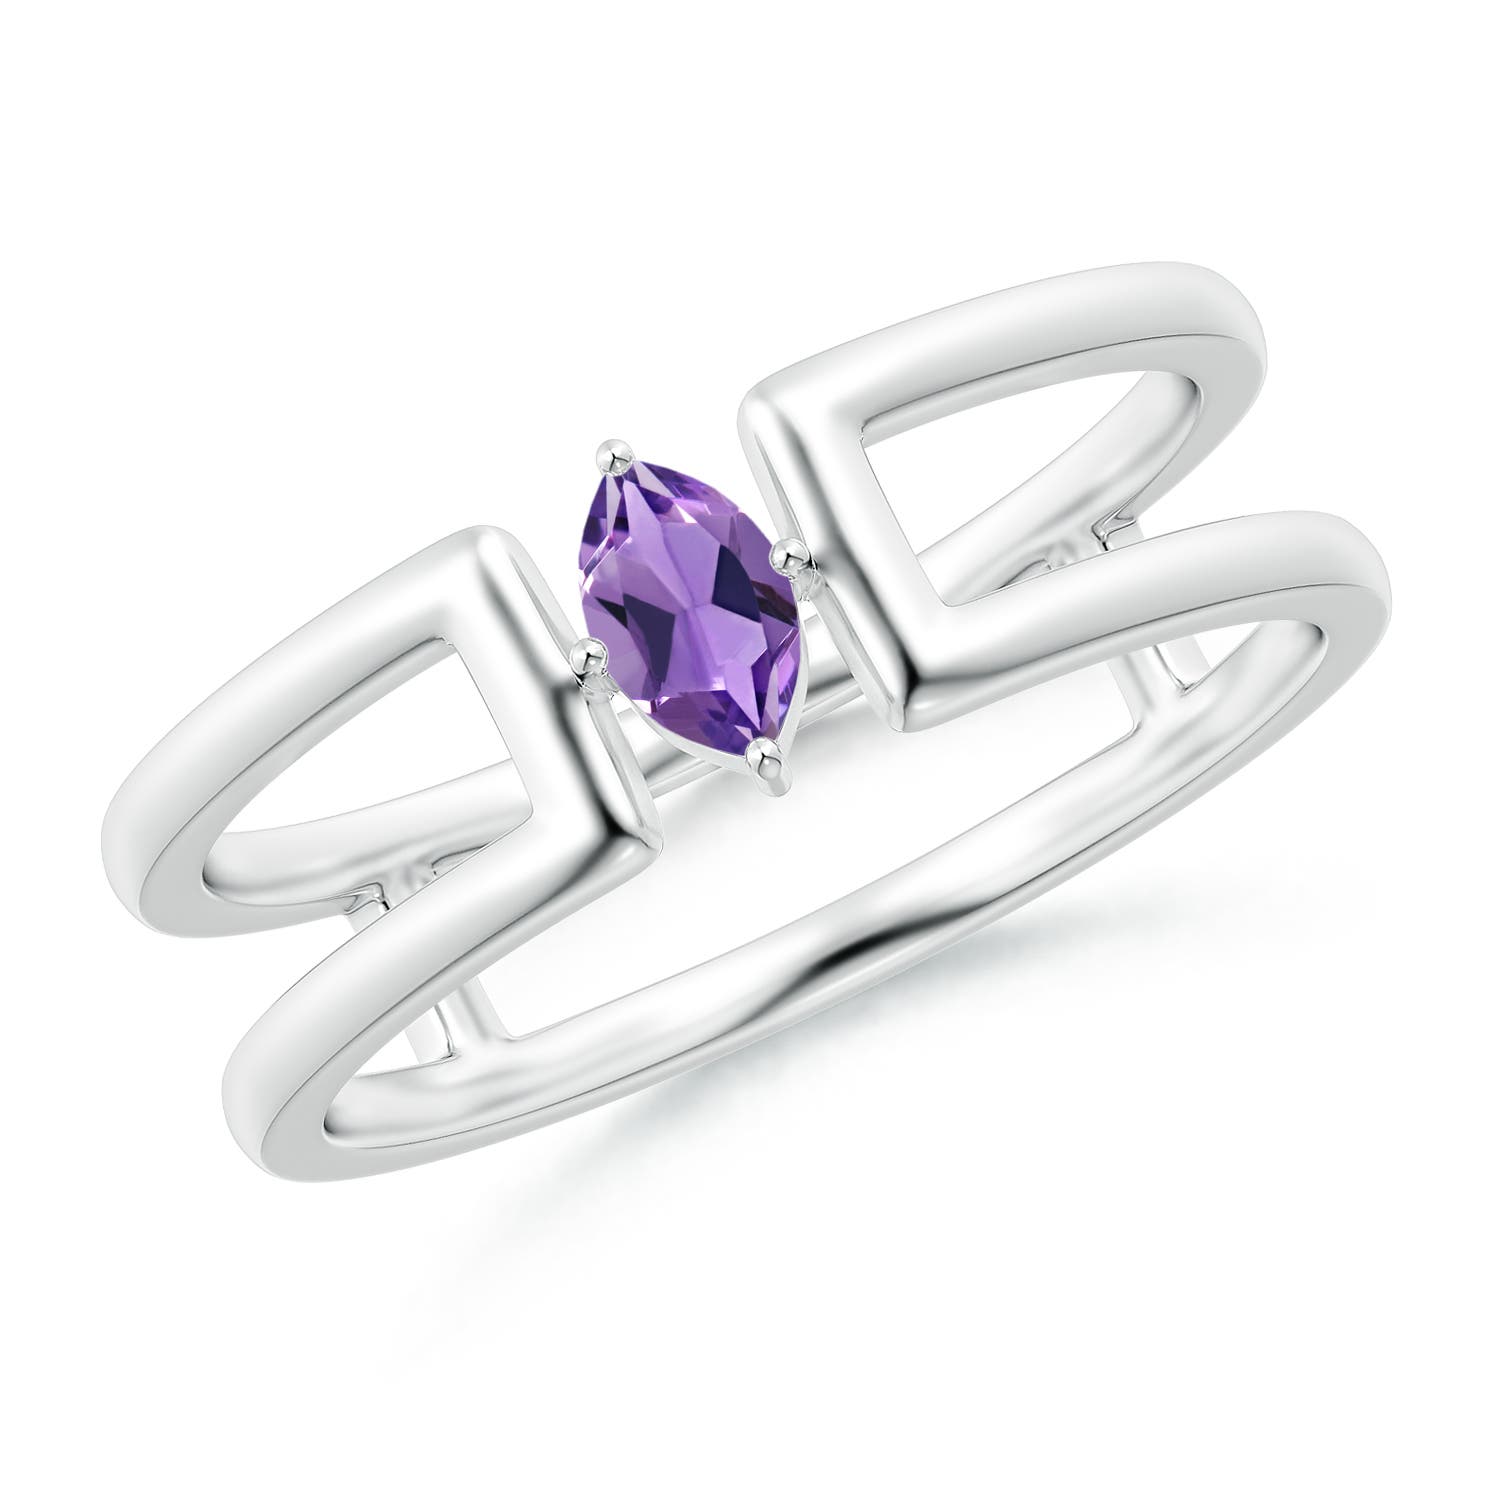 AA - Amethyst / 0.13 CT / 14 KT White Gold